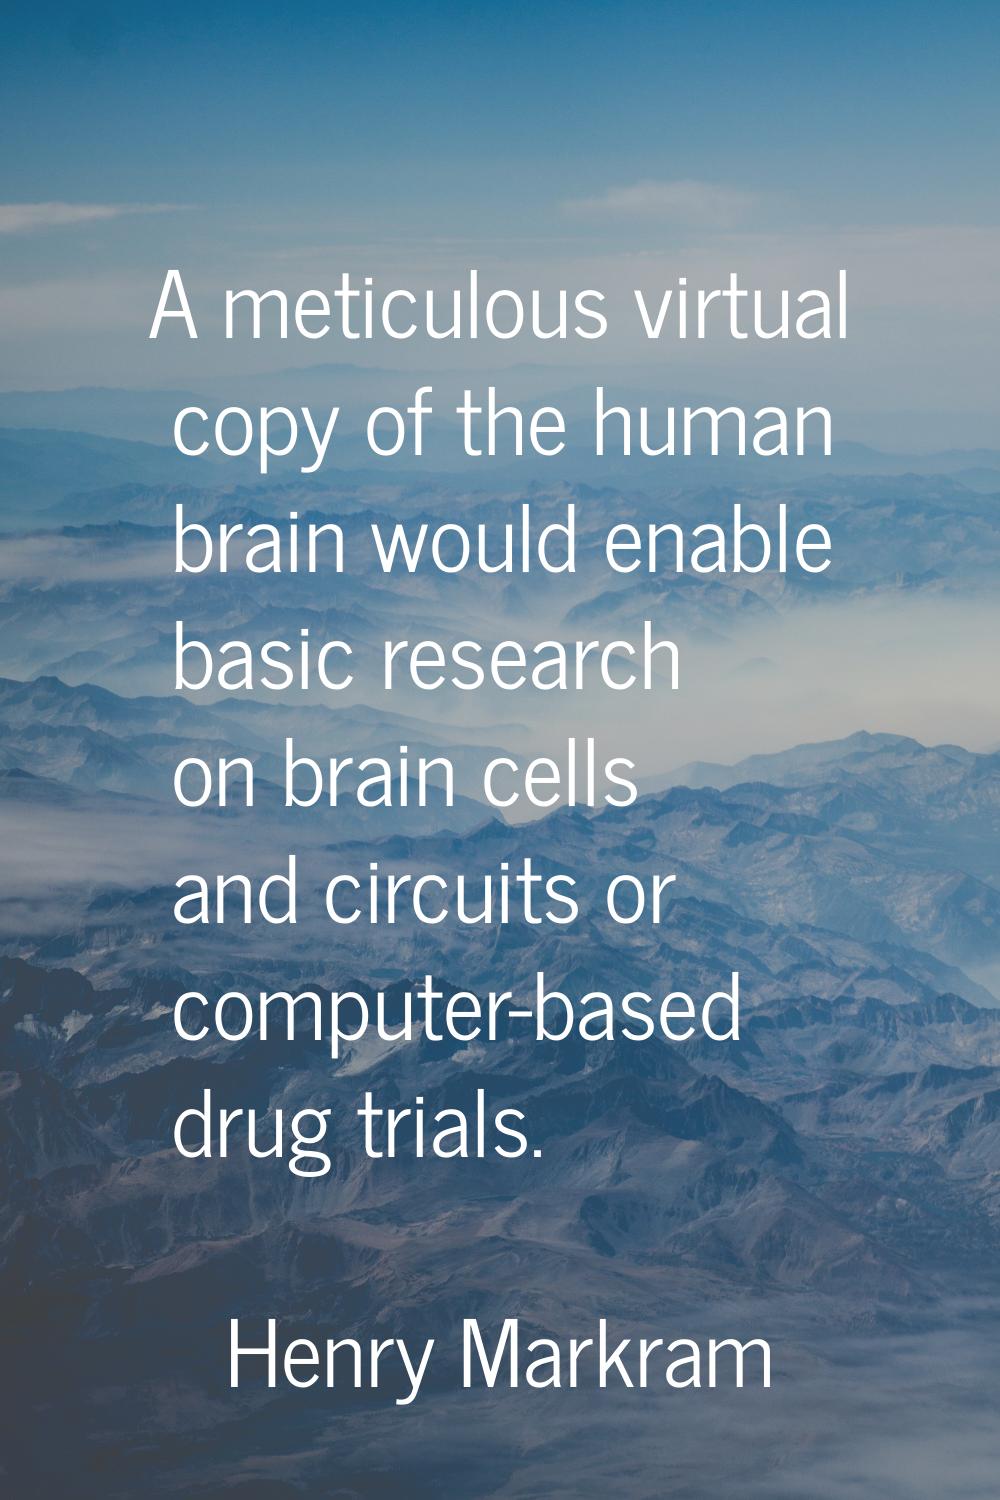 A meticulous virtual copy of the human brain would enable basic research on brain cells and circuit